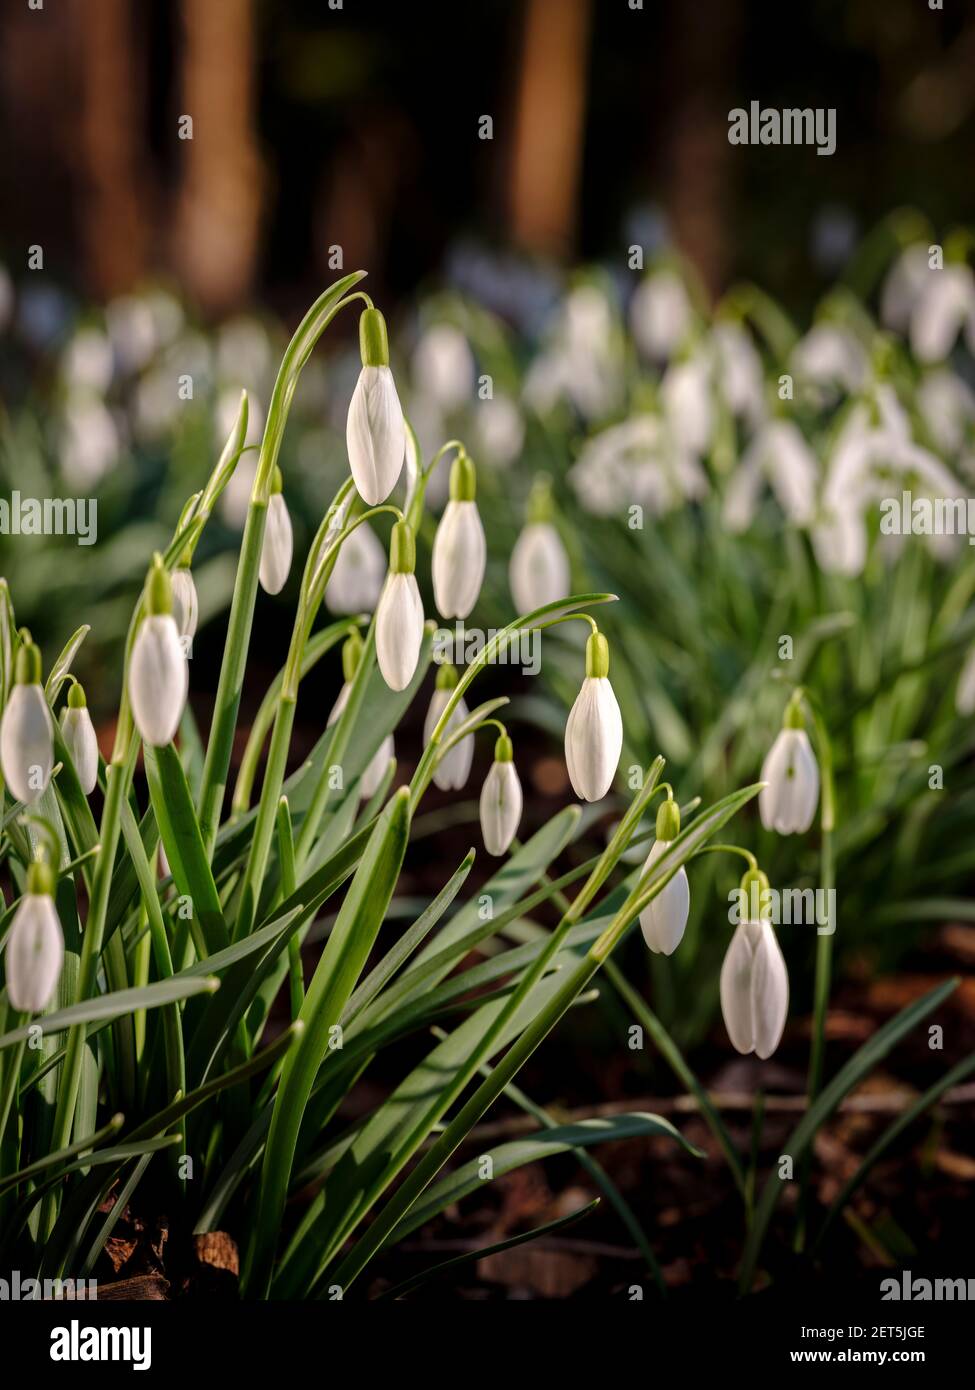 A mass of snowdrops in early spring viewed from a low angle and photographed on the first day of the meteorological spring, March 1st. Jim Holden, UK Stock Photo